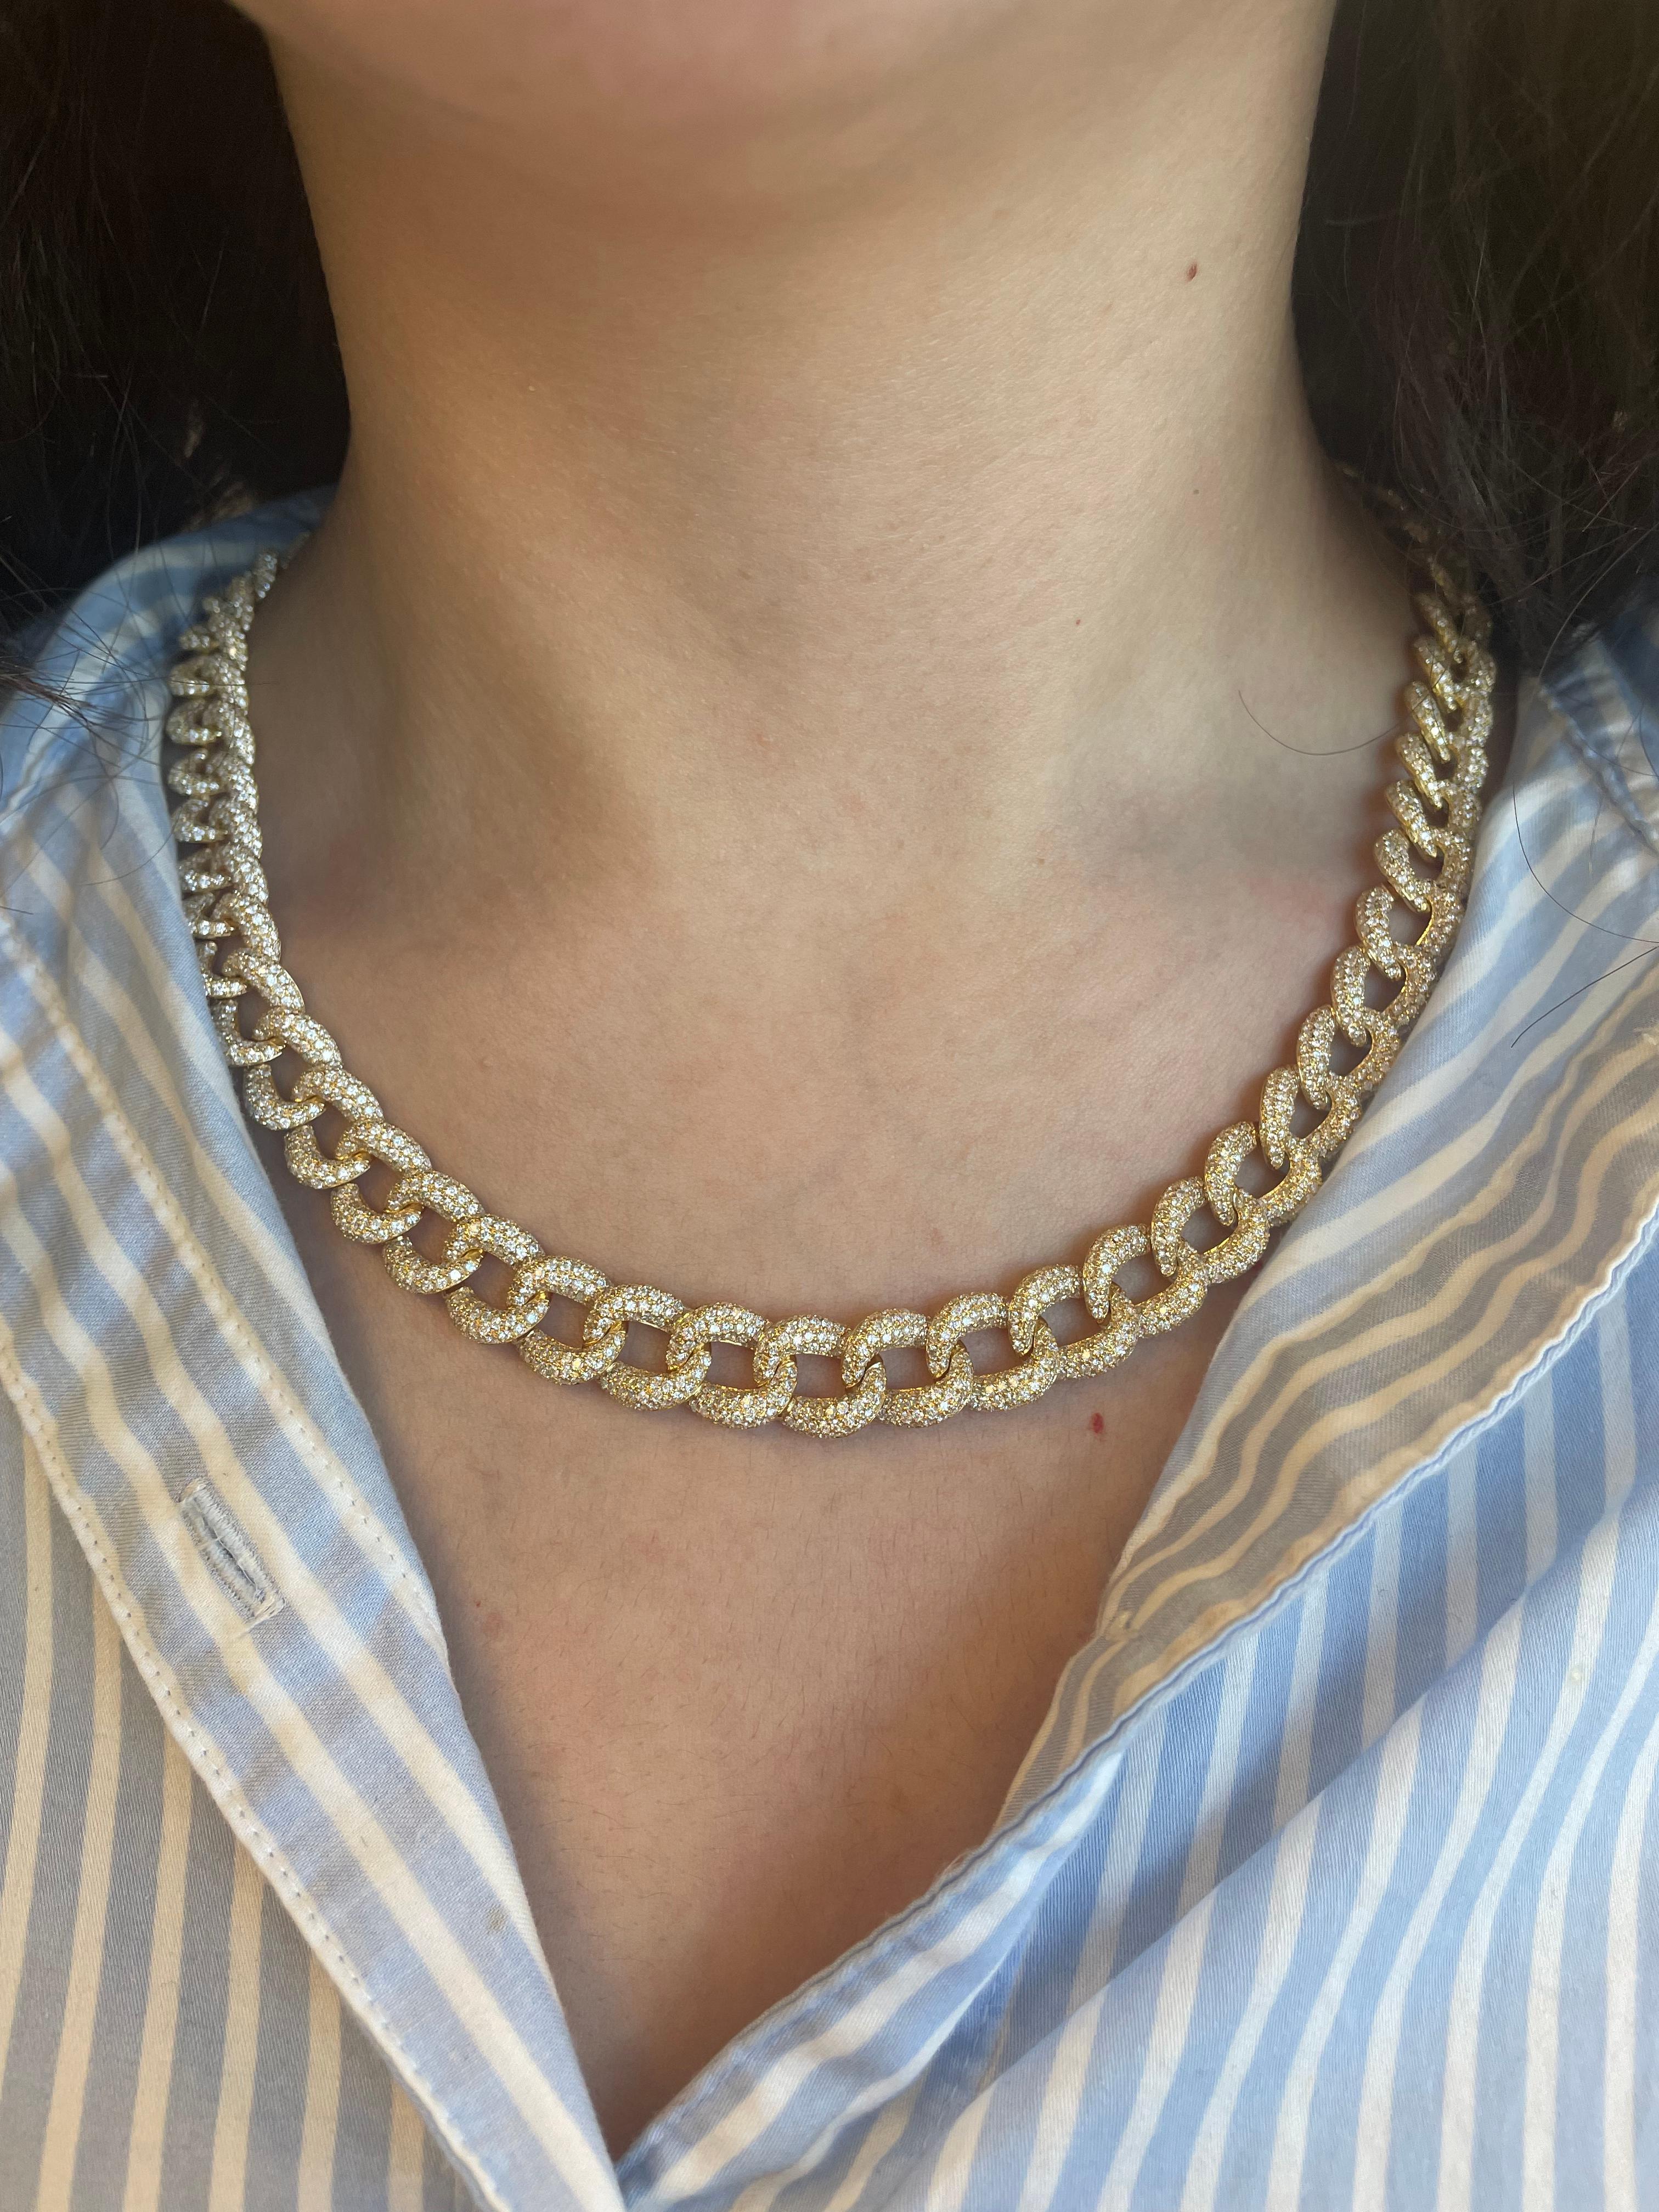 Modern diamond cuban link Necklace. High jewelry by Alexander Beverly Hills.
3584 round brilliant diamonds, 25.07 carats total. Approximately G/H color and VS2/SI1 clarity. 18k yellow gold, 123.98 grams, and 12mm width.
Accommodated with an